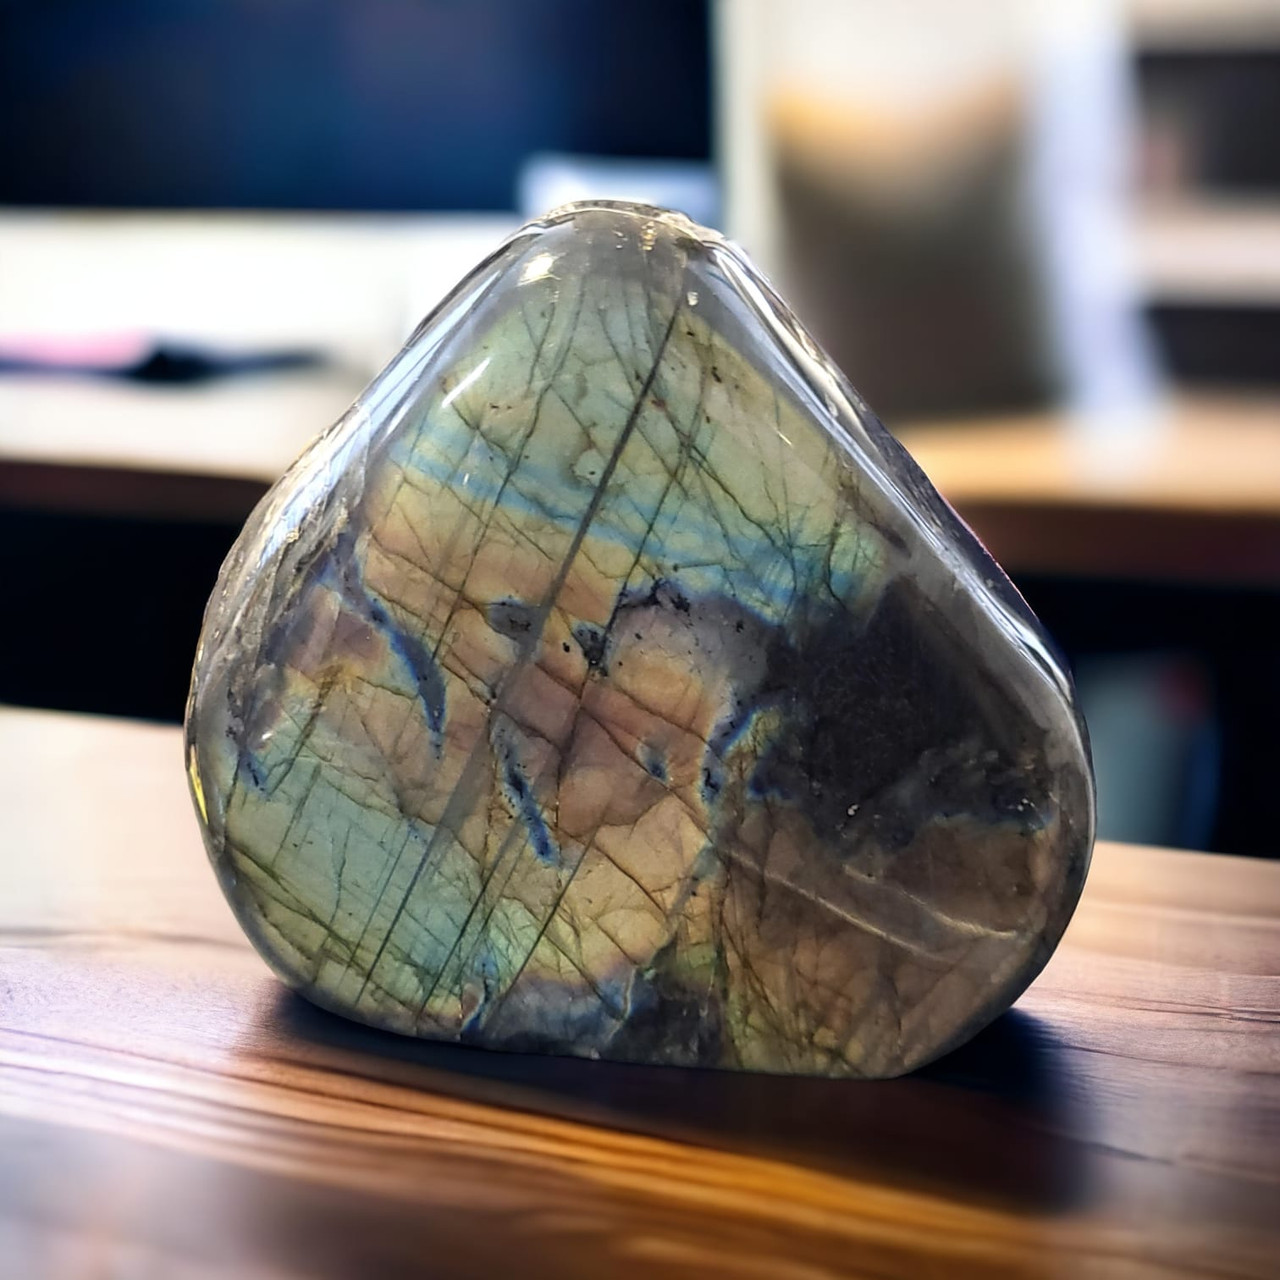 Experience the magic of Labradorite direct from the earth's depths. Our freeforms showcase the natural wonder of this gemstone, sourced from renowned locations worldwide.